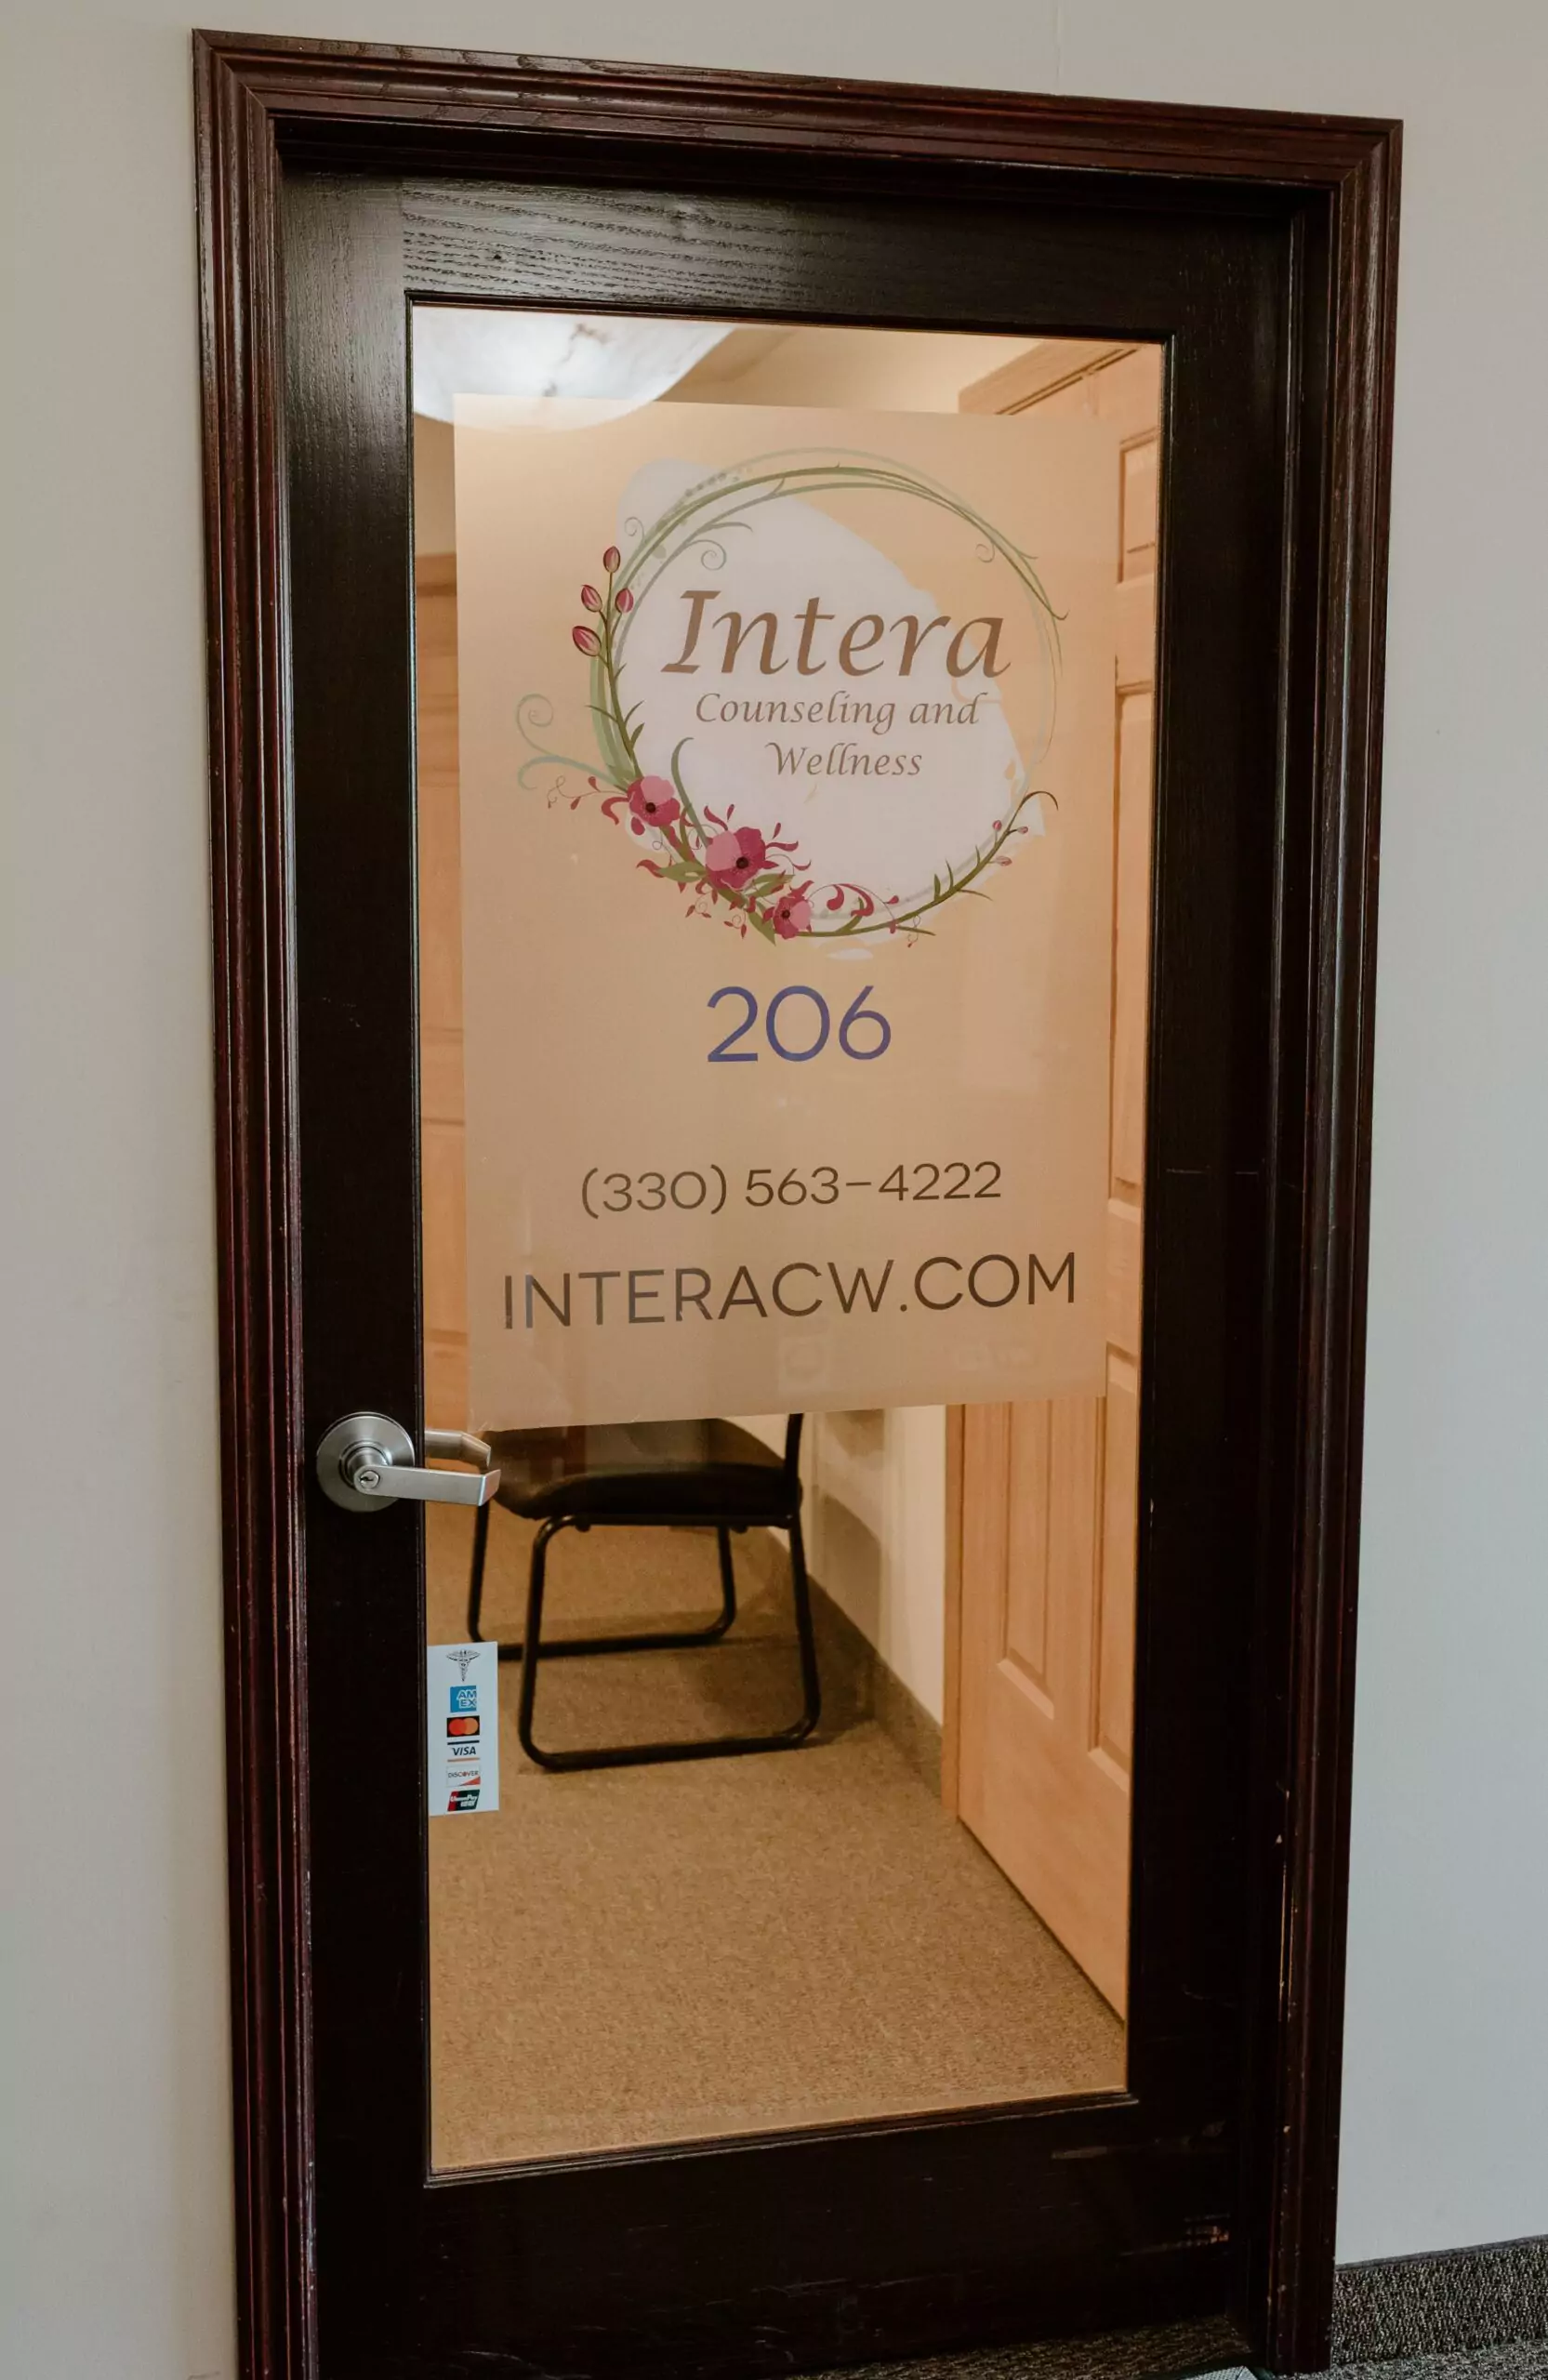 Door into Intera's office. Brown frame with clear glass. The Intera logo is on the top of the glass with the office number (206) under the logo.